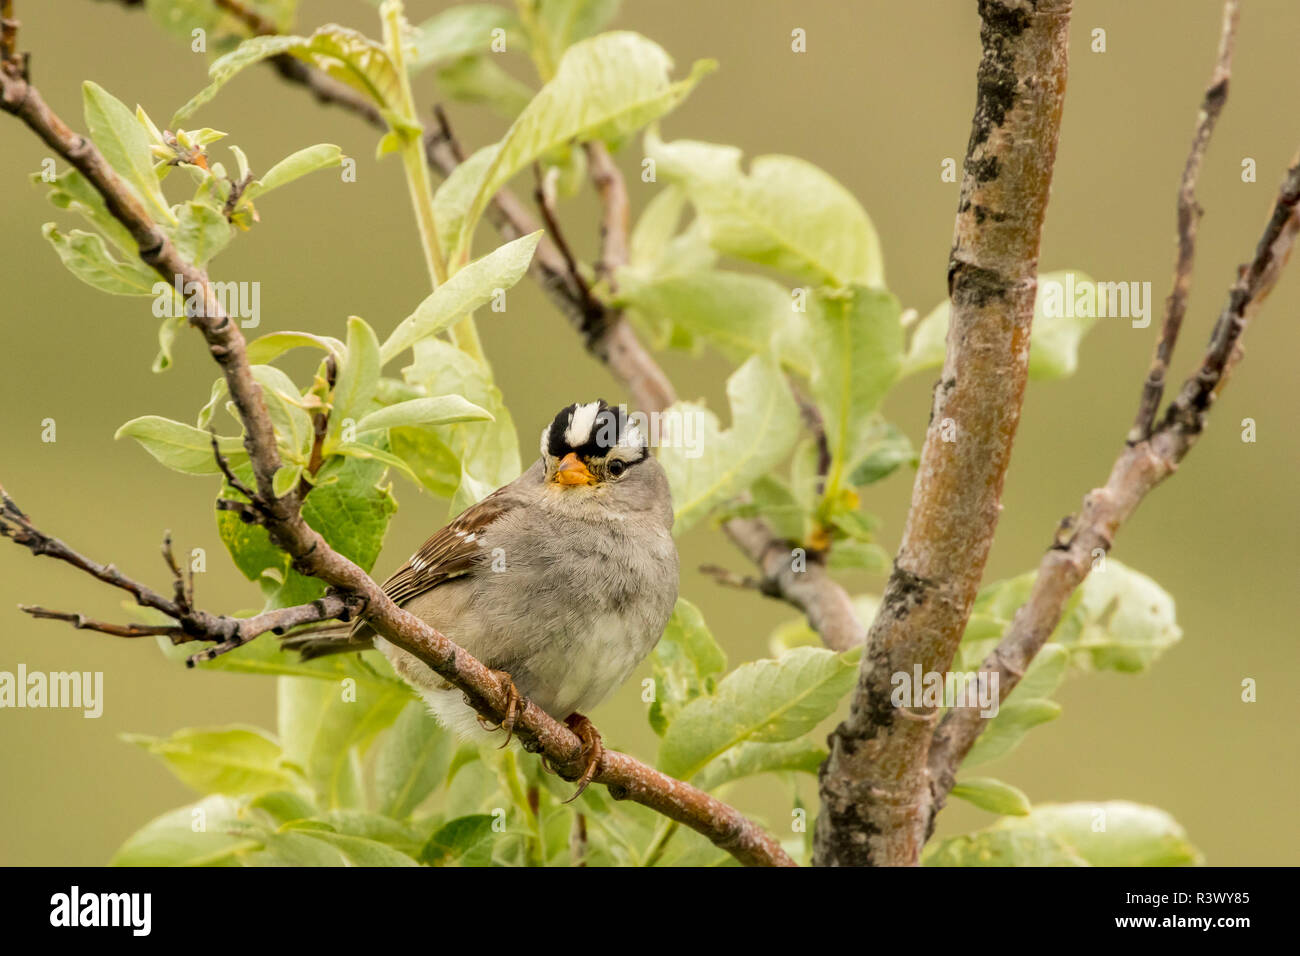 USA, Alaska, Nome. White-crowned sparrow in tree. Stock Photo